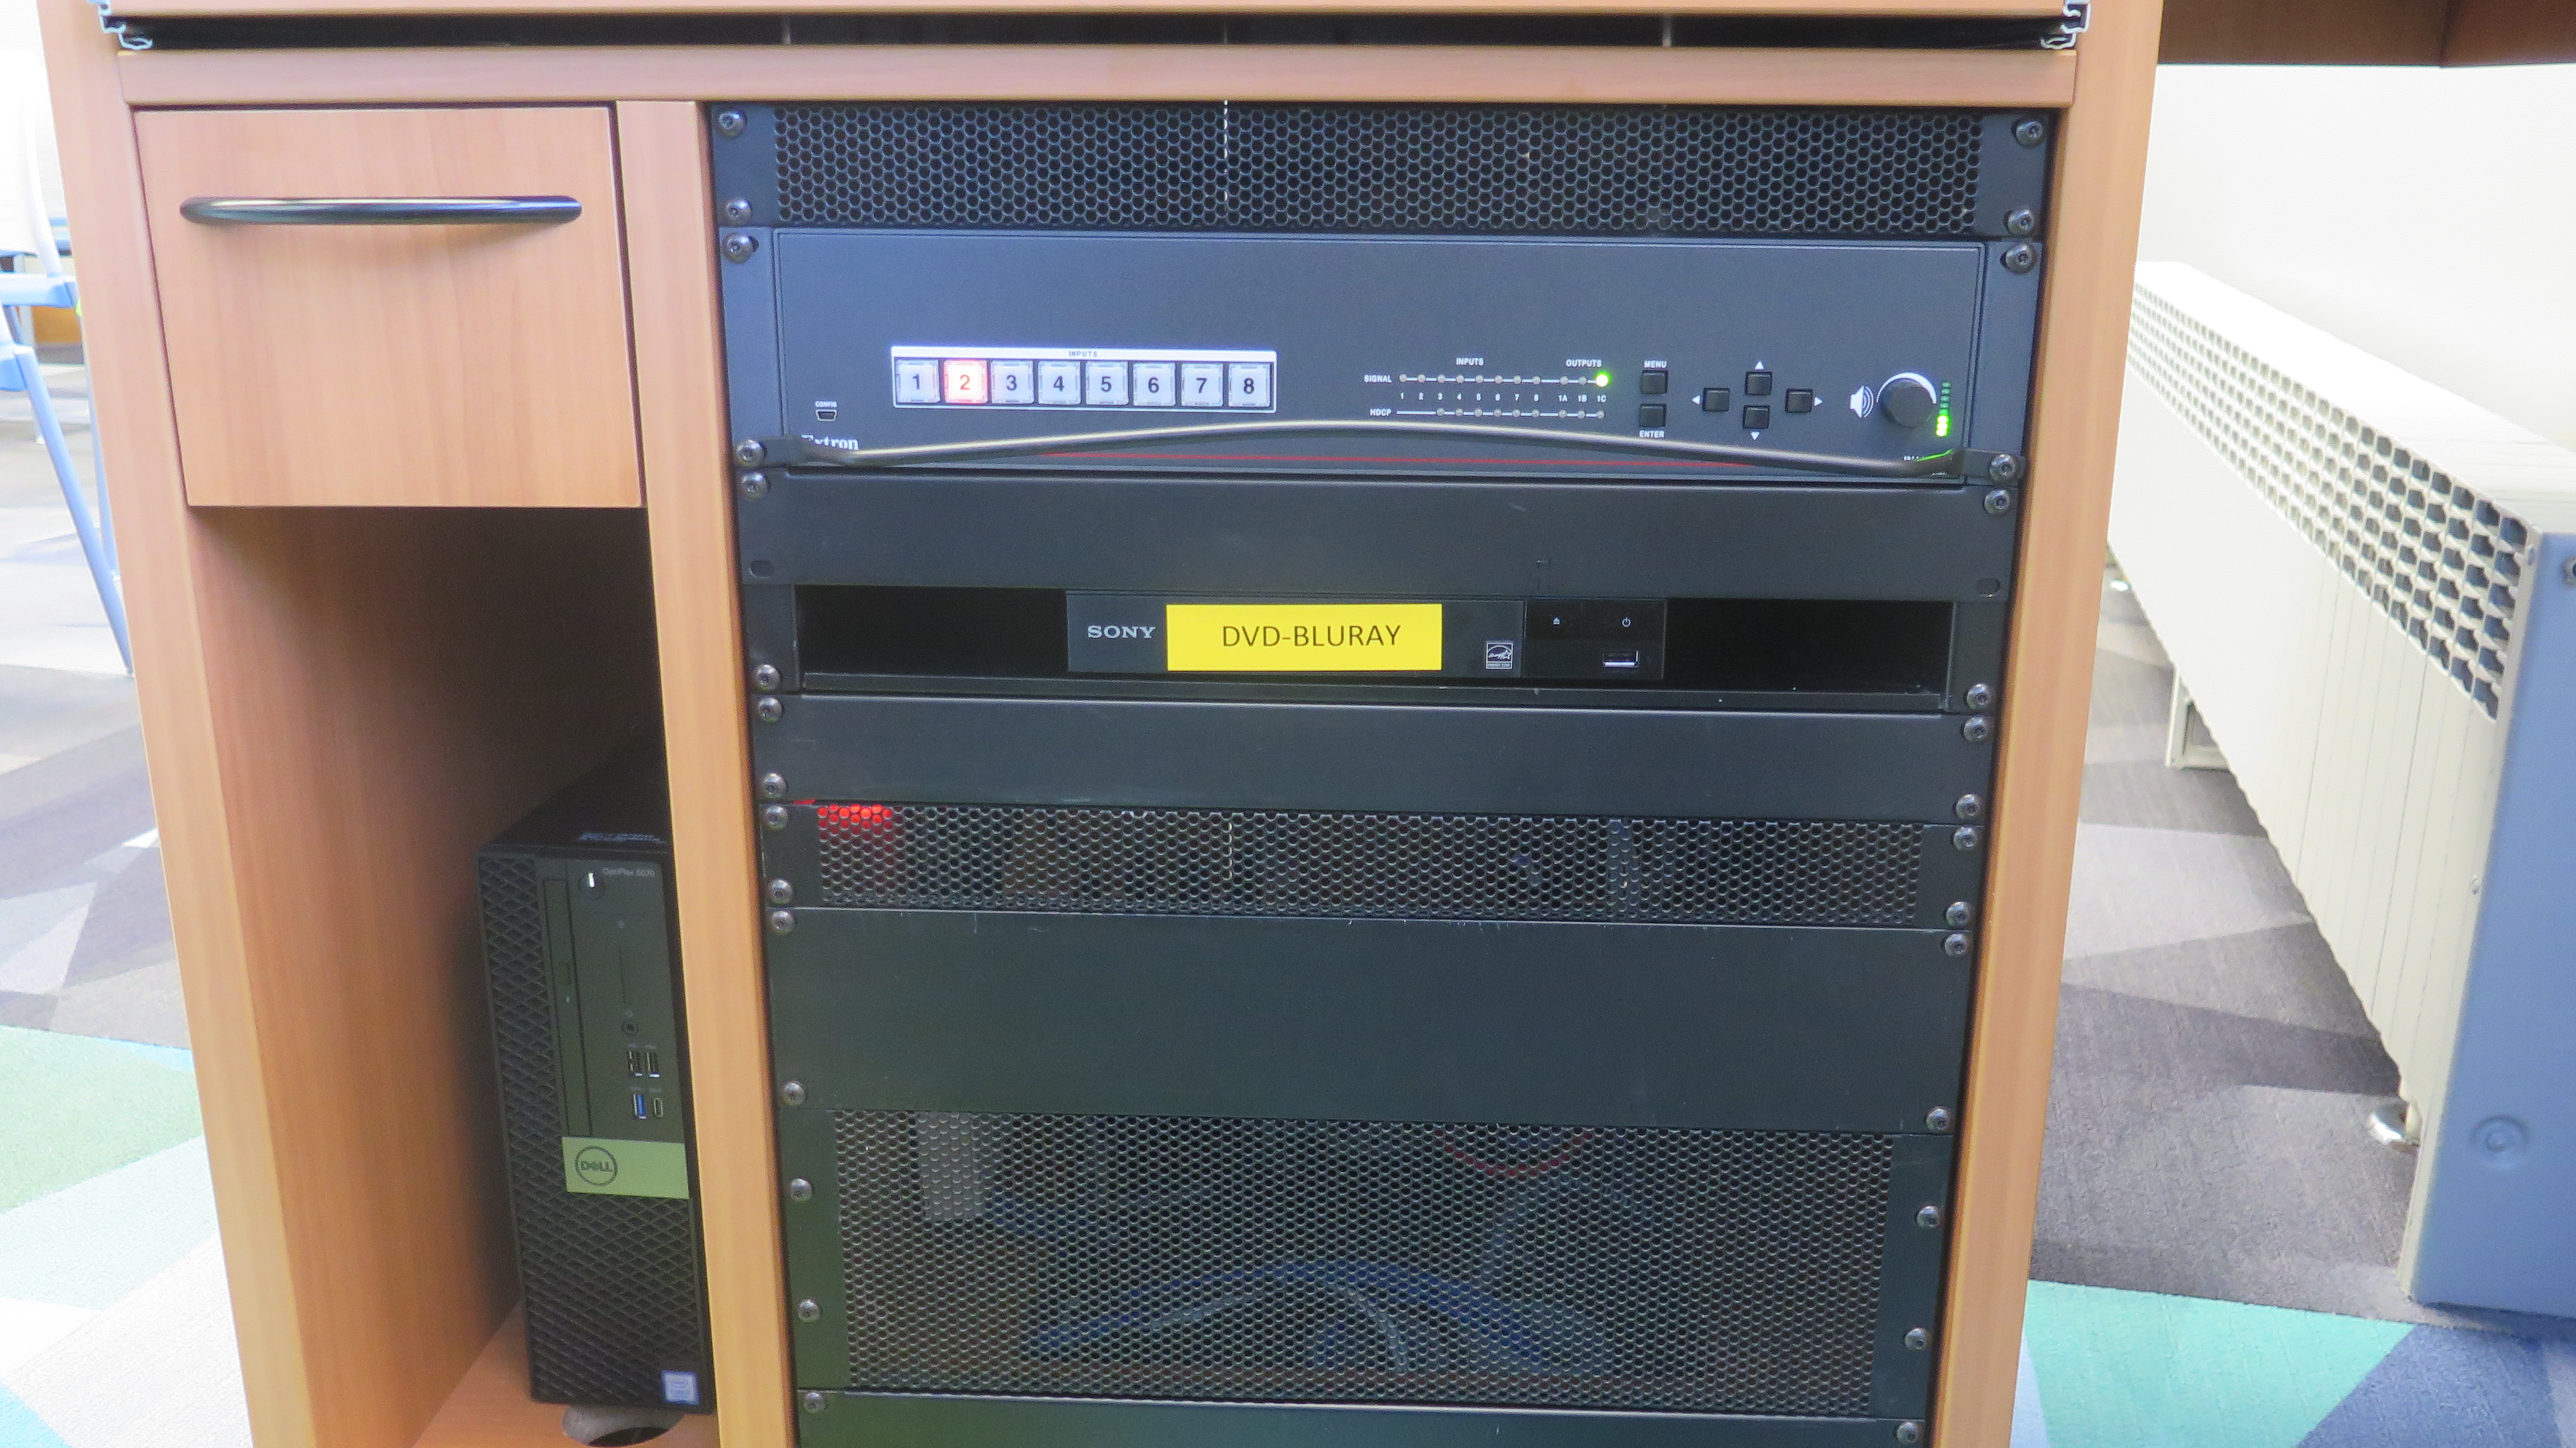 Display rack consists of a AV controller, Blu-Ray/DVD player and Dell Computer CPU.